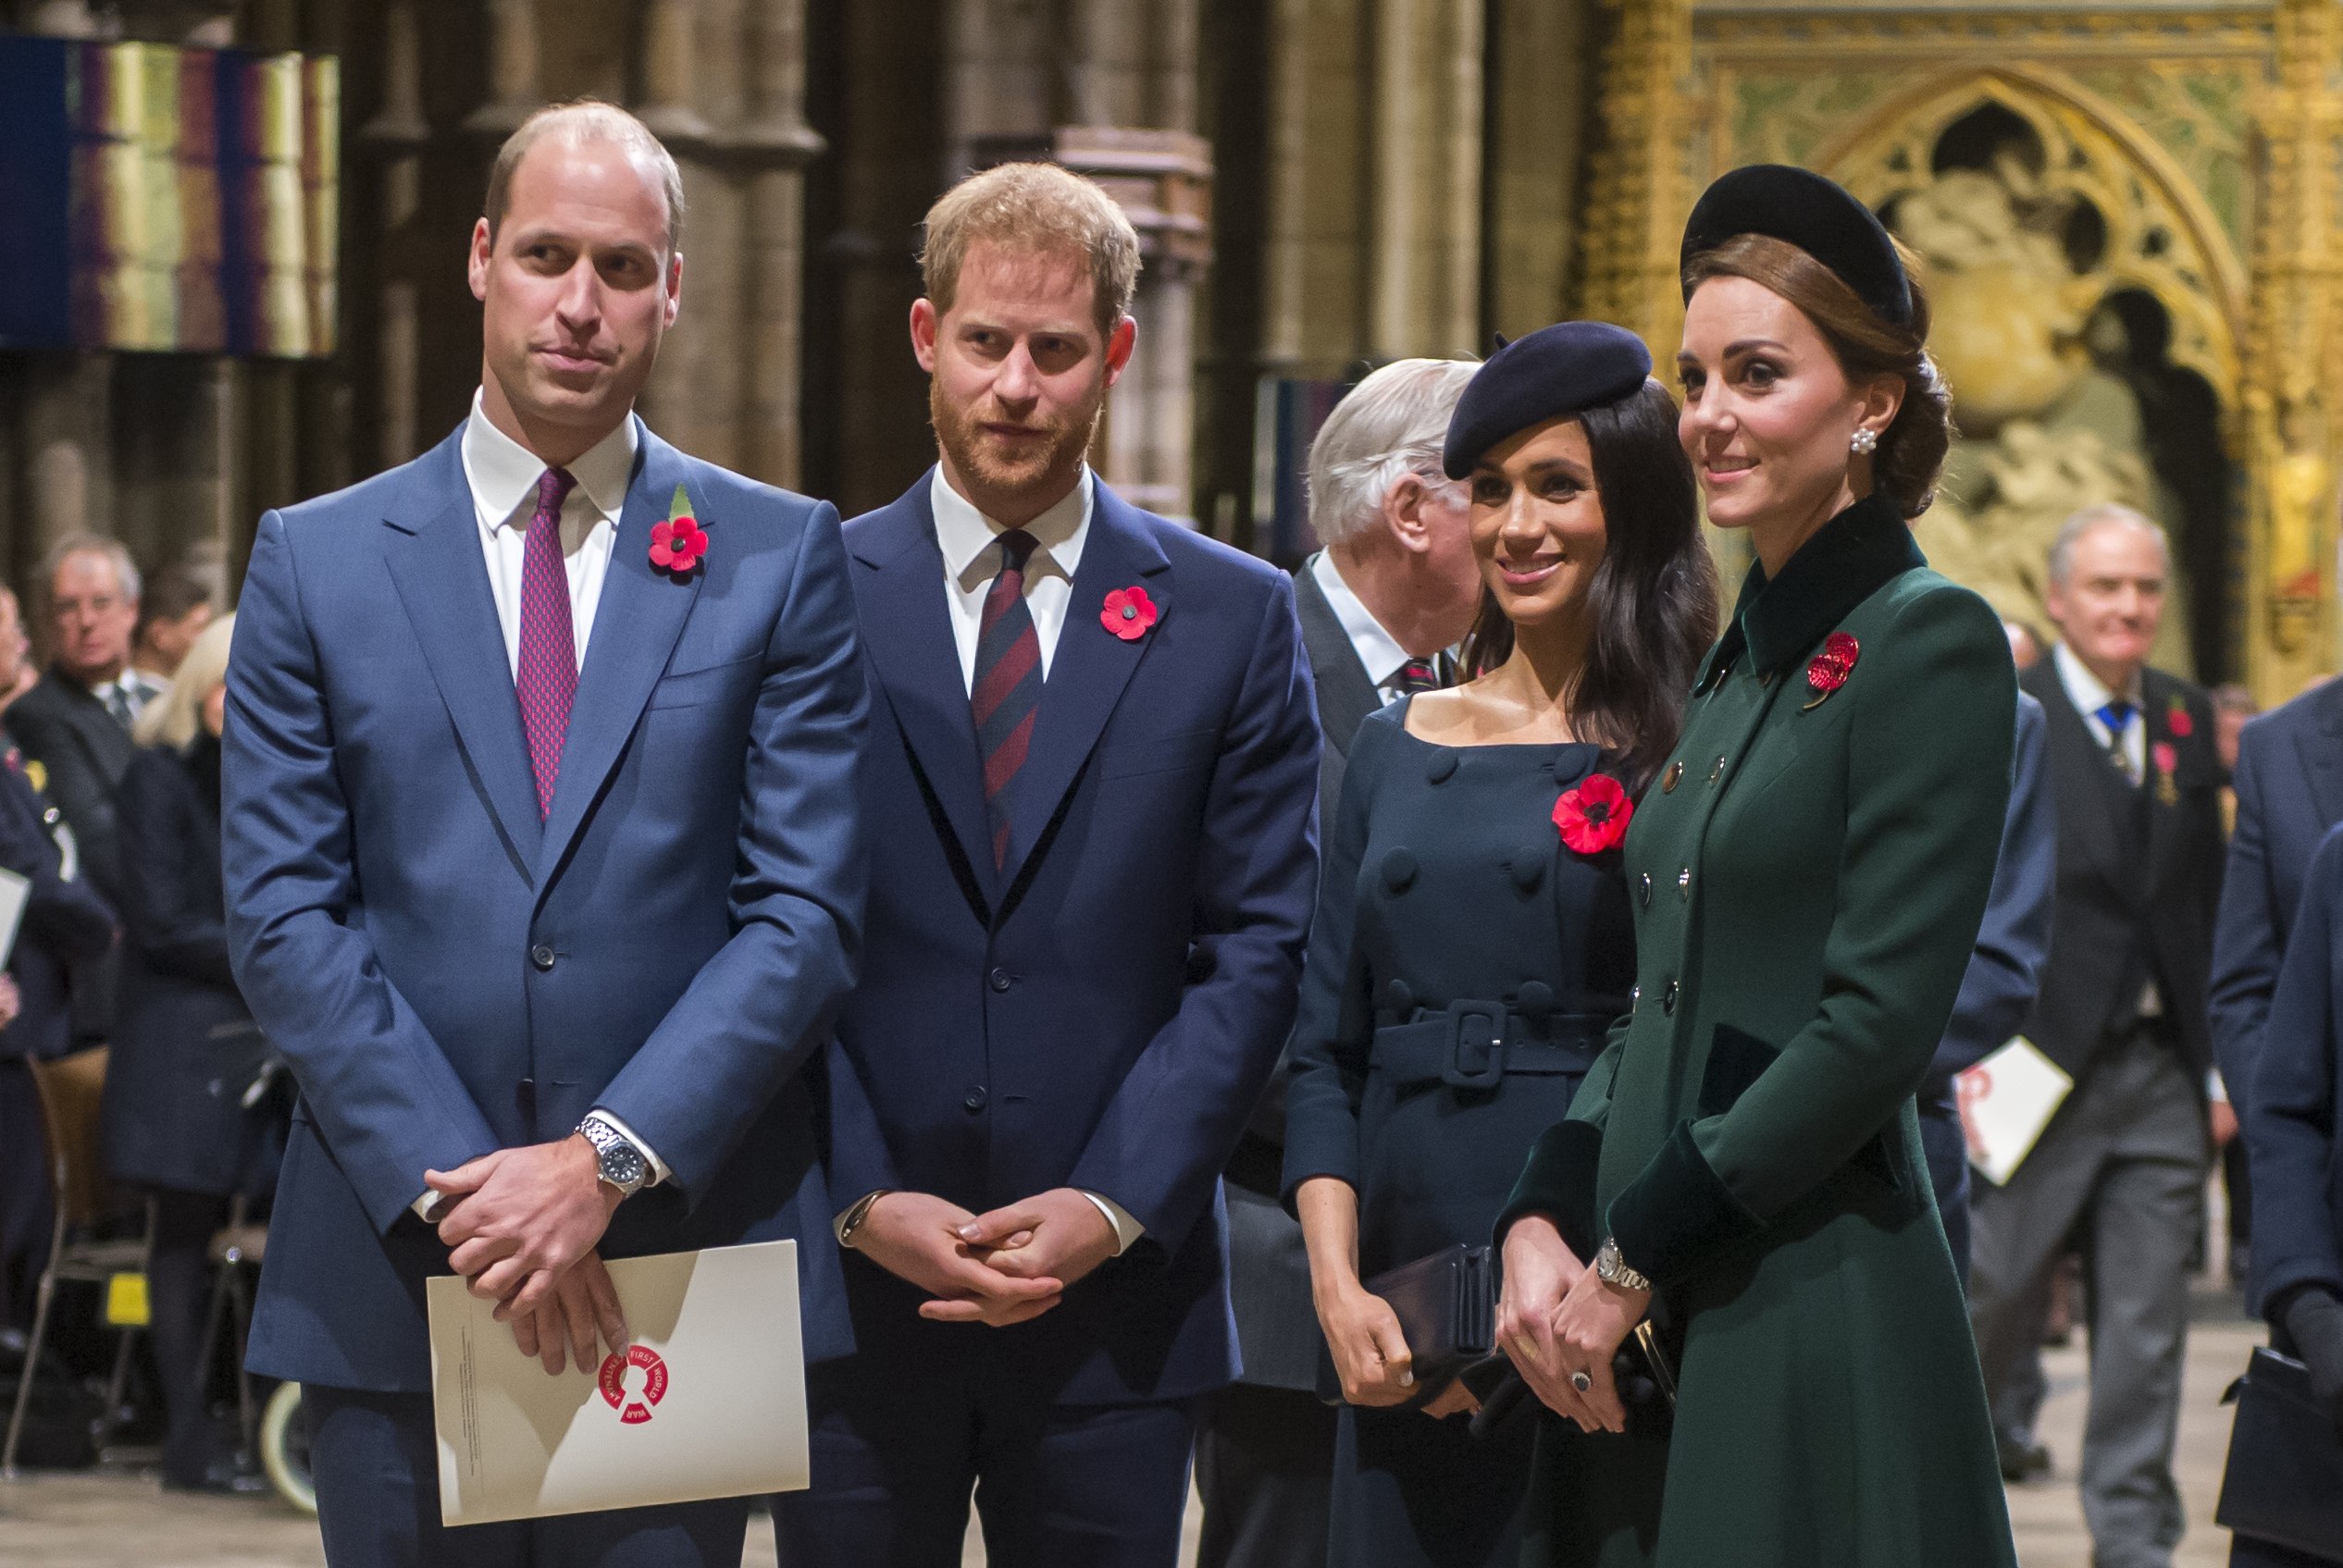 Prince William, Catherine Middleton, Prince Harry, and Meghan Markle during a service marking the centenary of WW1 armistice at Westminster Abbey on November 11, 2018 in London, England. | Source: Getty Images